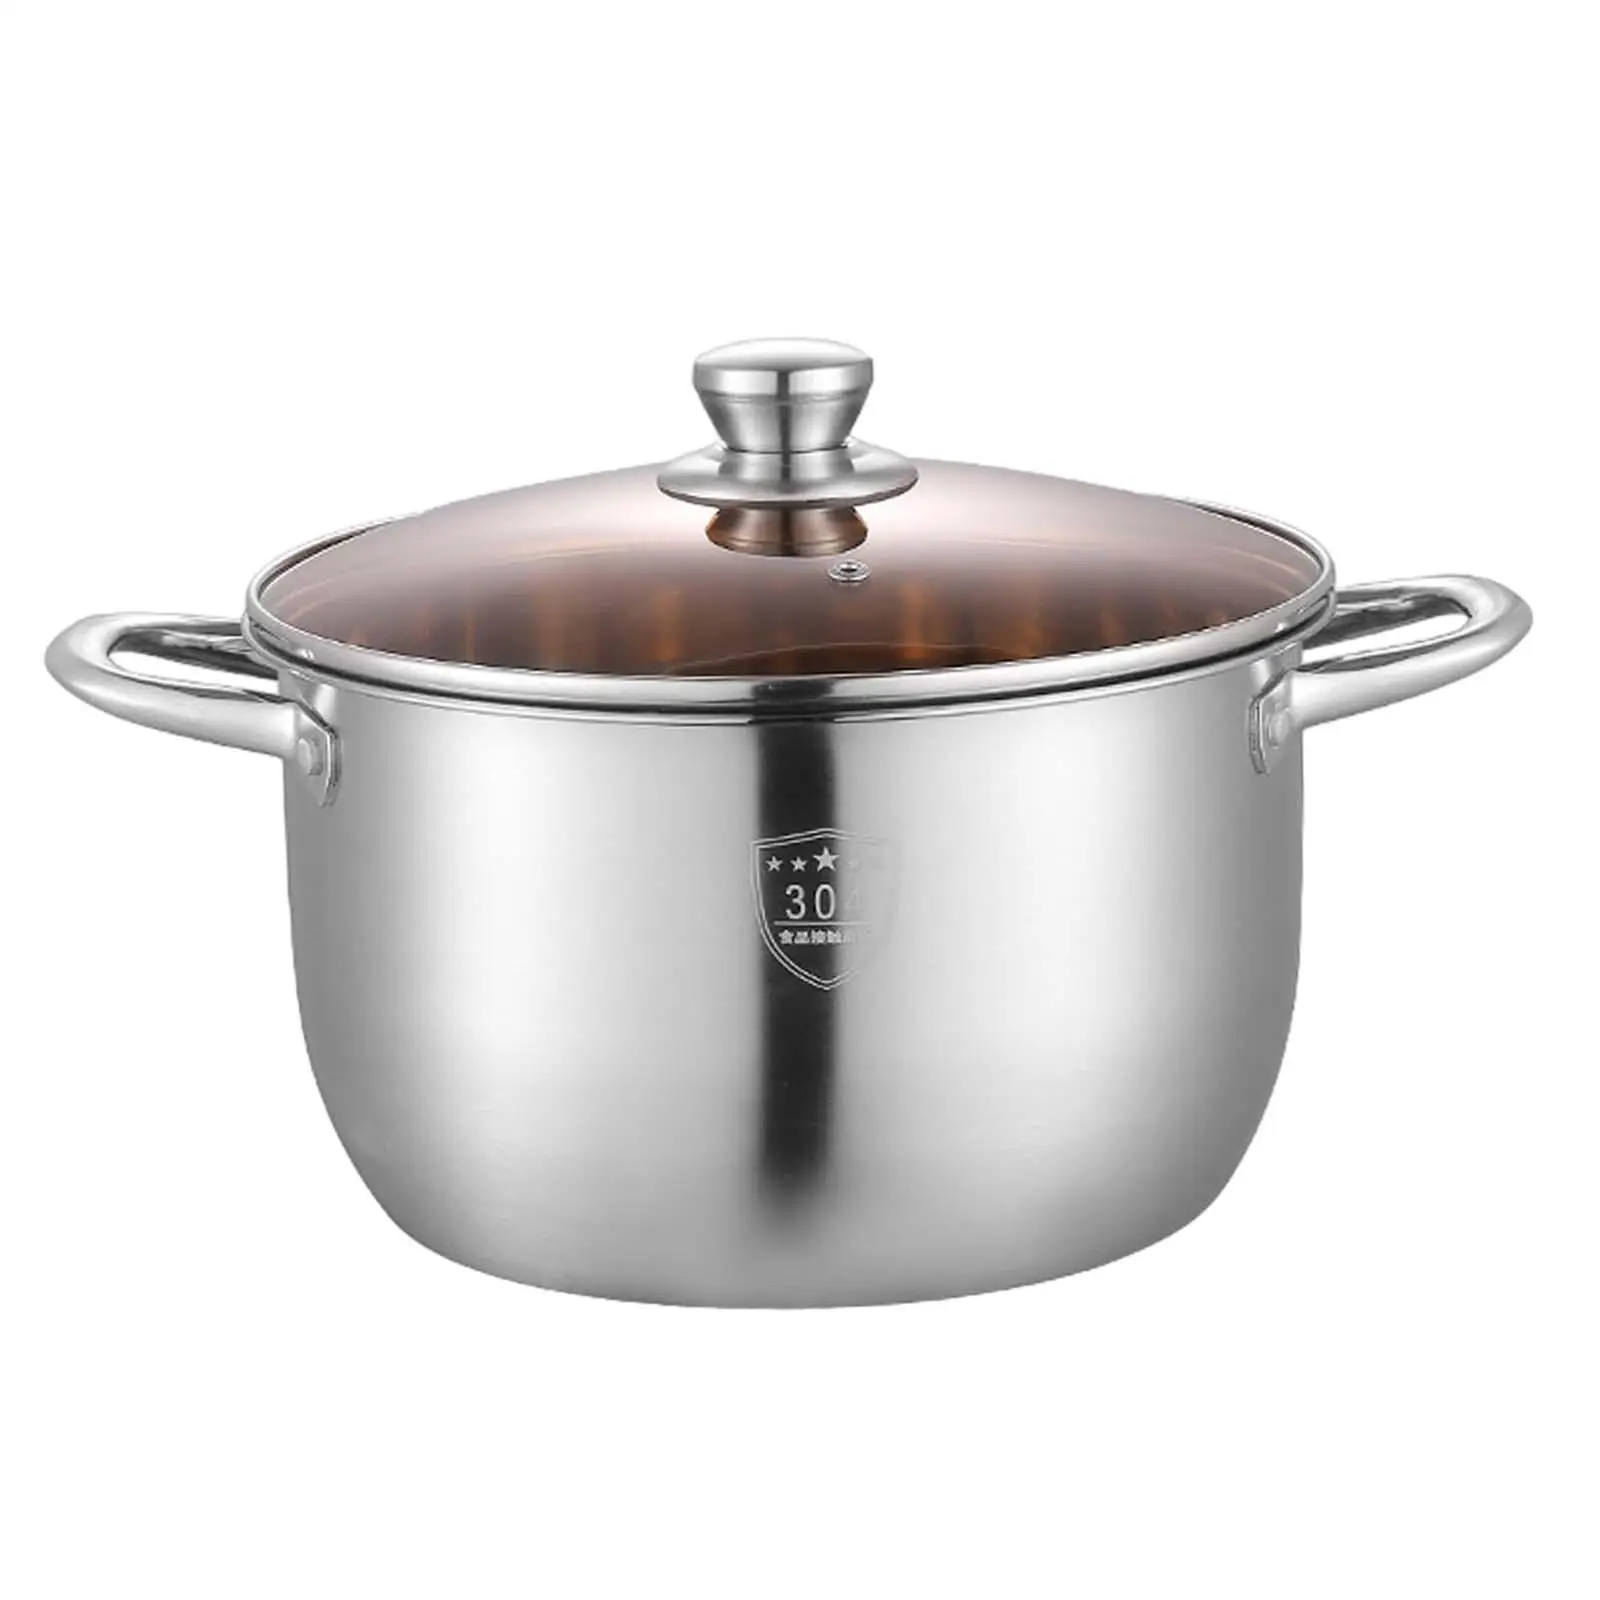 Stainless Steel Stockpot with Lid Universal Base Double Handle Non Stick Soup Pot for Warming Milk Soup Sauce Vegetables Noodles